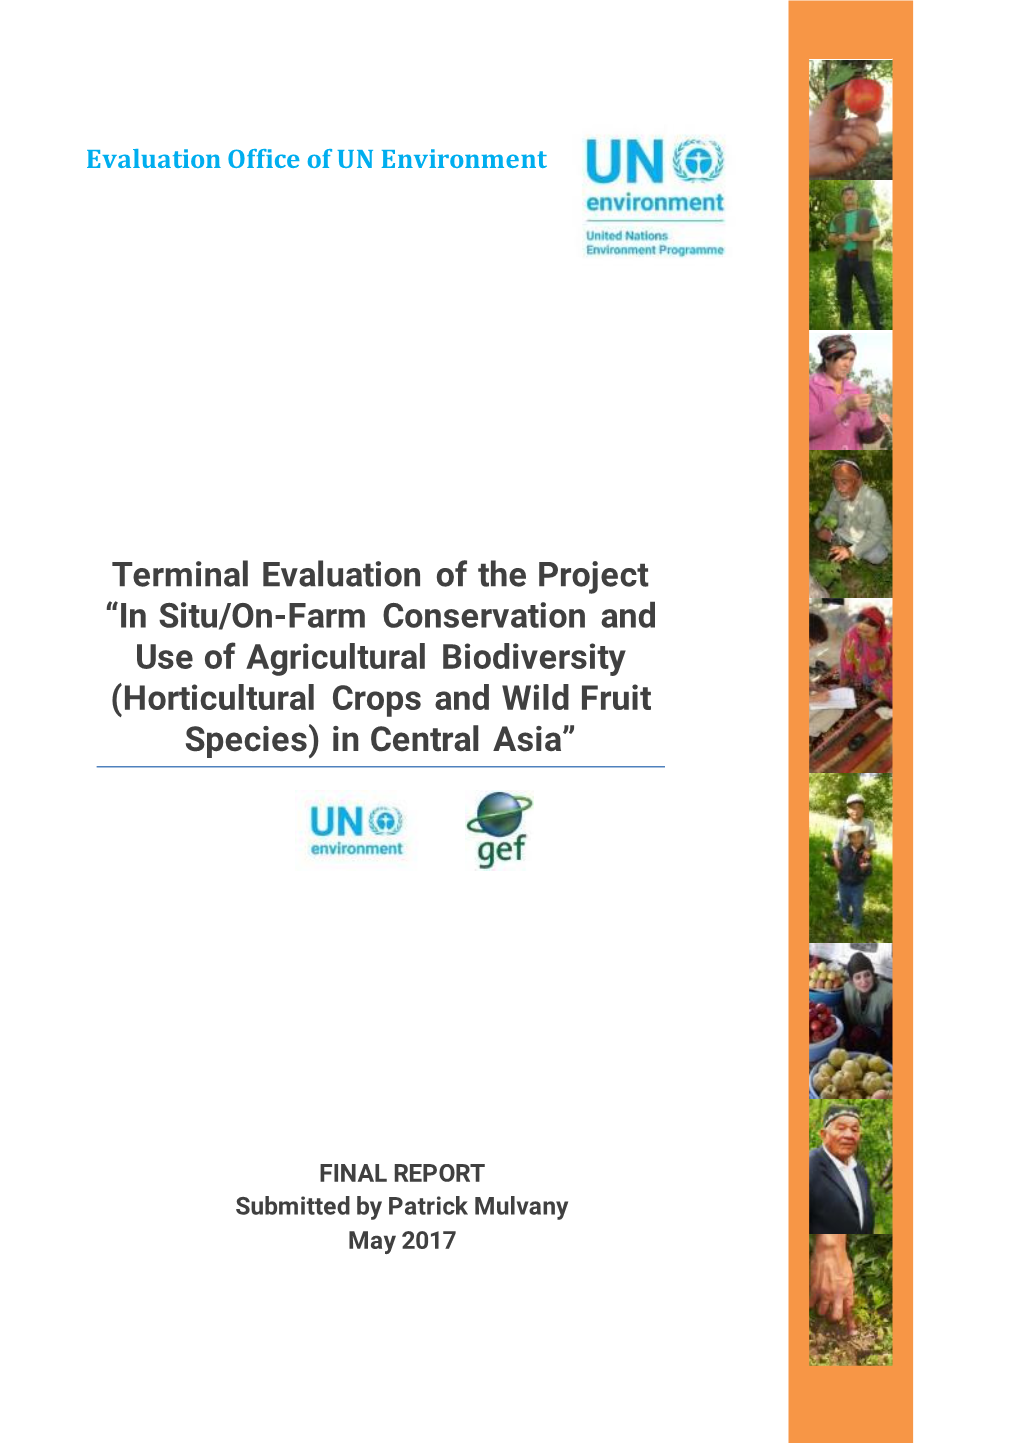 Terminal Evaluation of the Project “In Situ/On-Farm Conservation and Use of Agricultural Biodiversity (Horticultural Crops and Wild Fruit Species) in Central Asia”